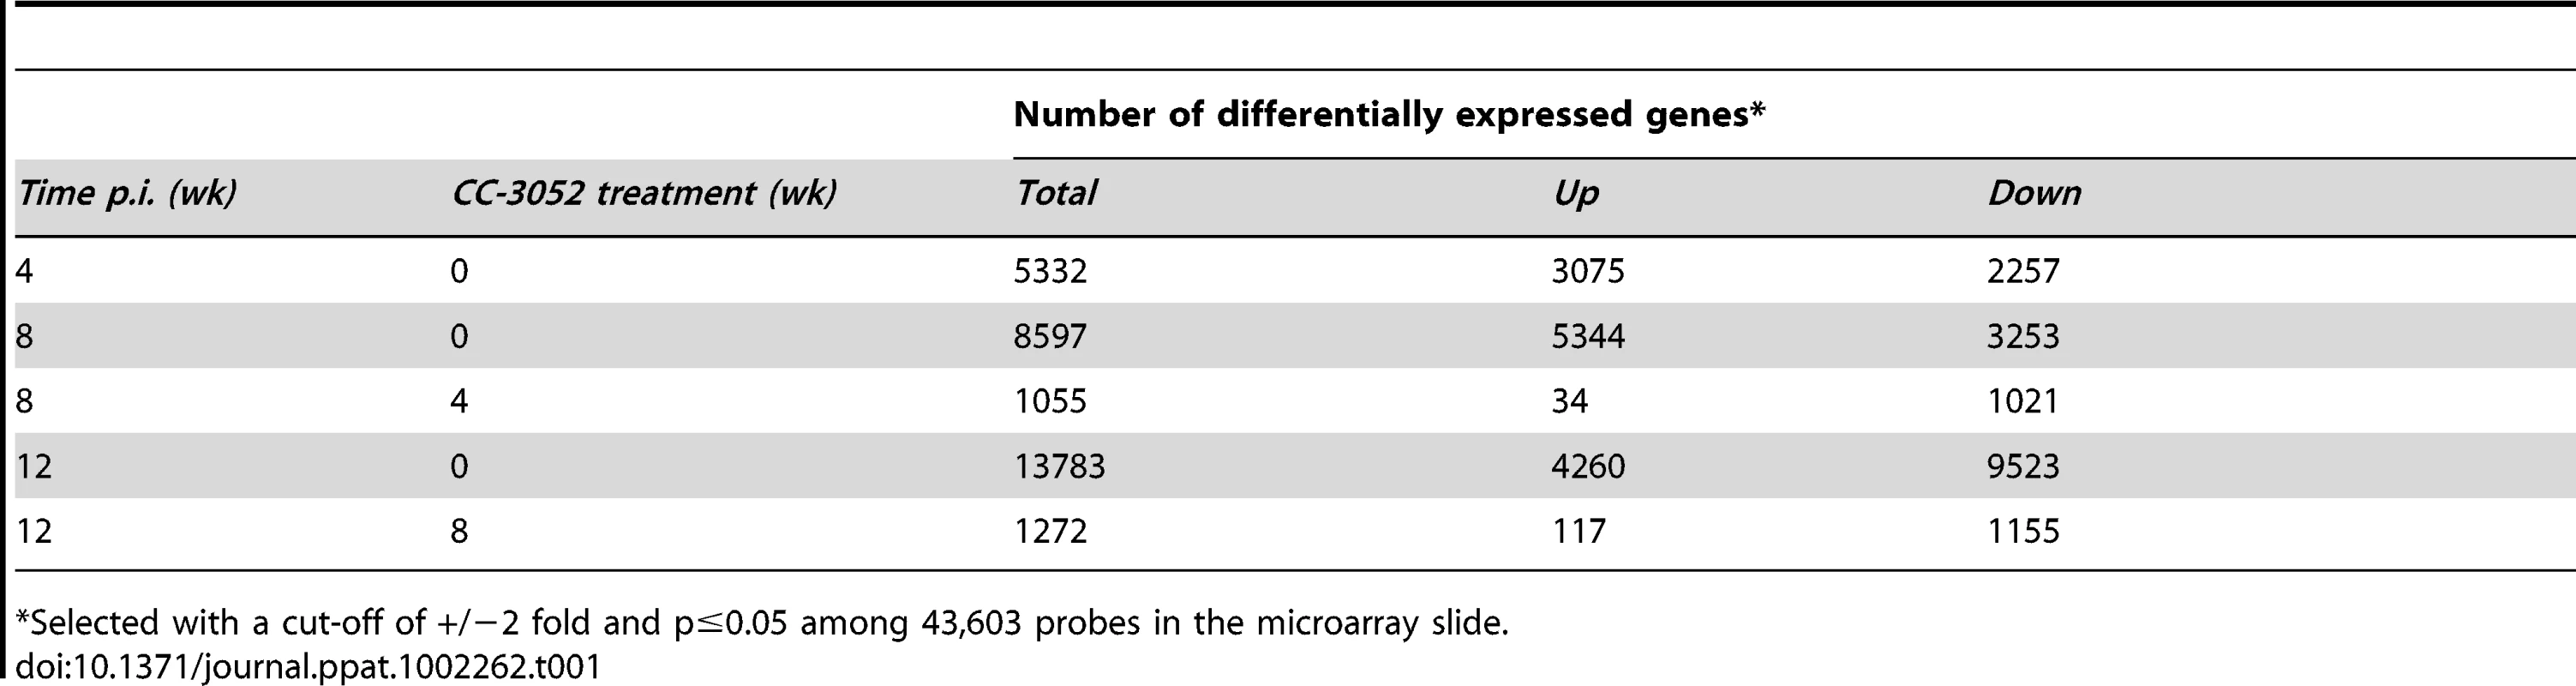 Number of differentially expressed host genes in <i>Mtb</i> infected rabbit lungs with or without CC-3052 treatment.